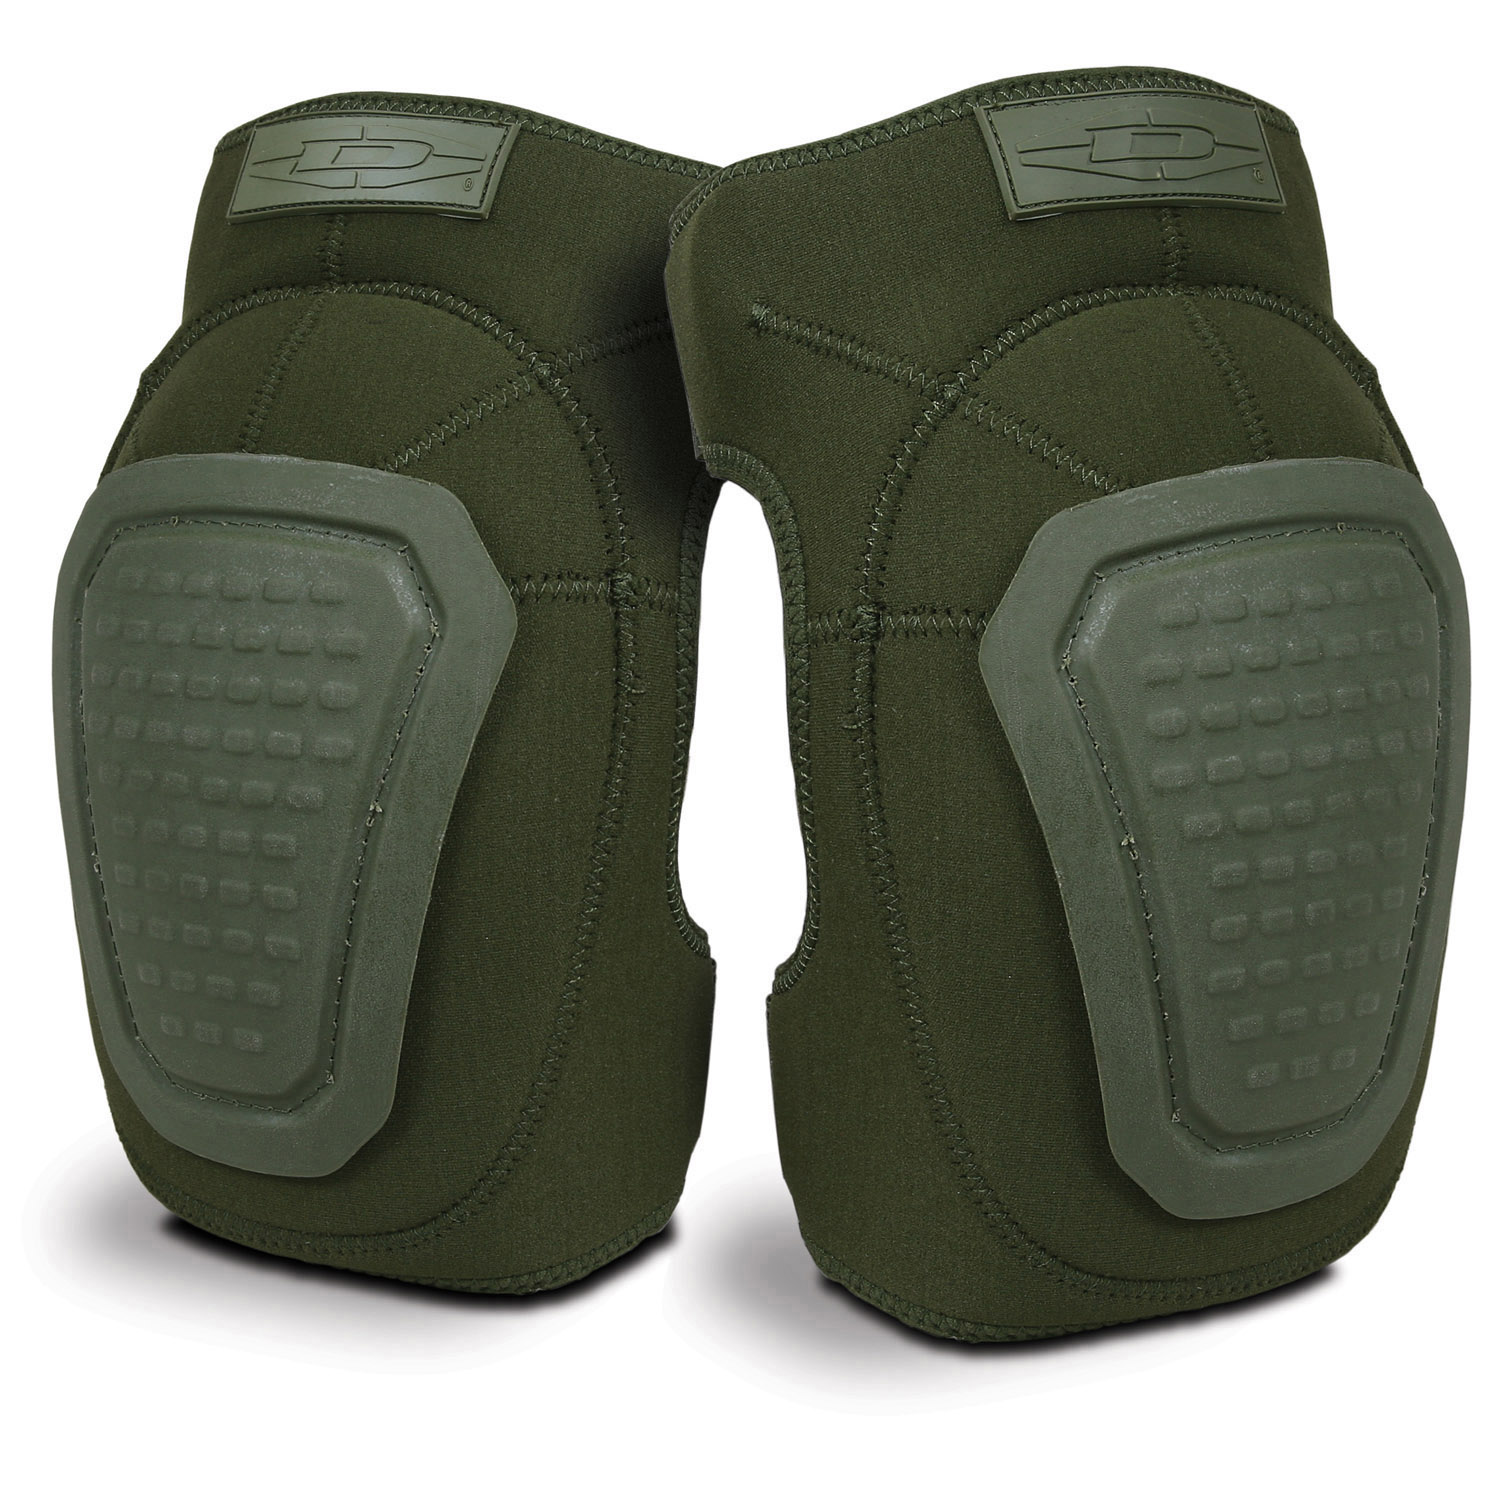 DAMASCUS IMPERIAL NEOPRENE KNEE PADS WITH REINFORCED NON-SLI